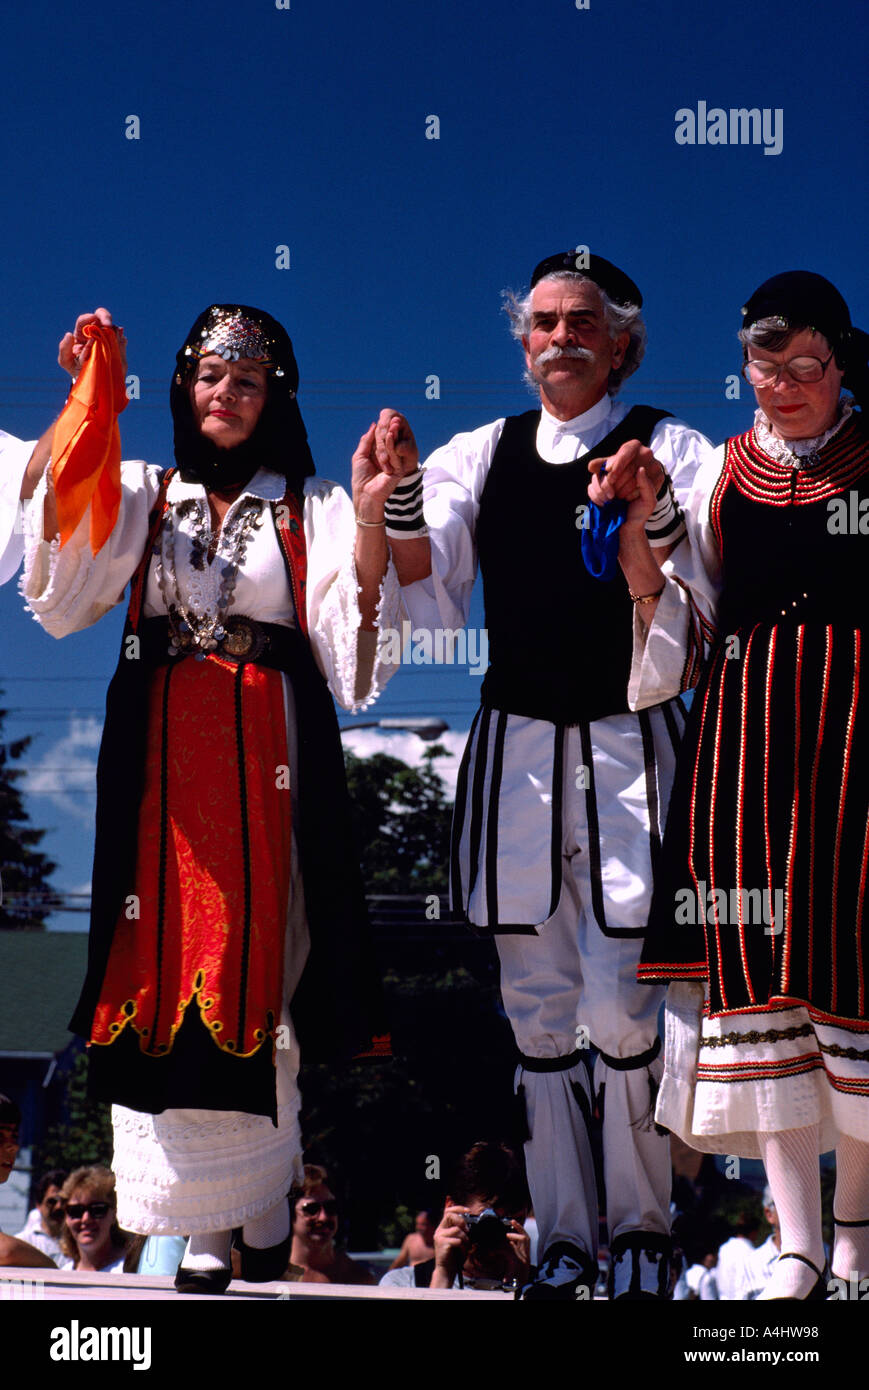 Greek Dancers in Ethnic Dress perform a Traditional Greek Dance in the City  of Vancouver British Columbia Canada Stock Photo - Alamy